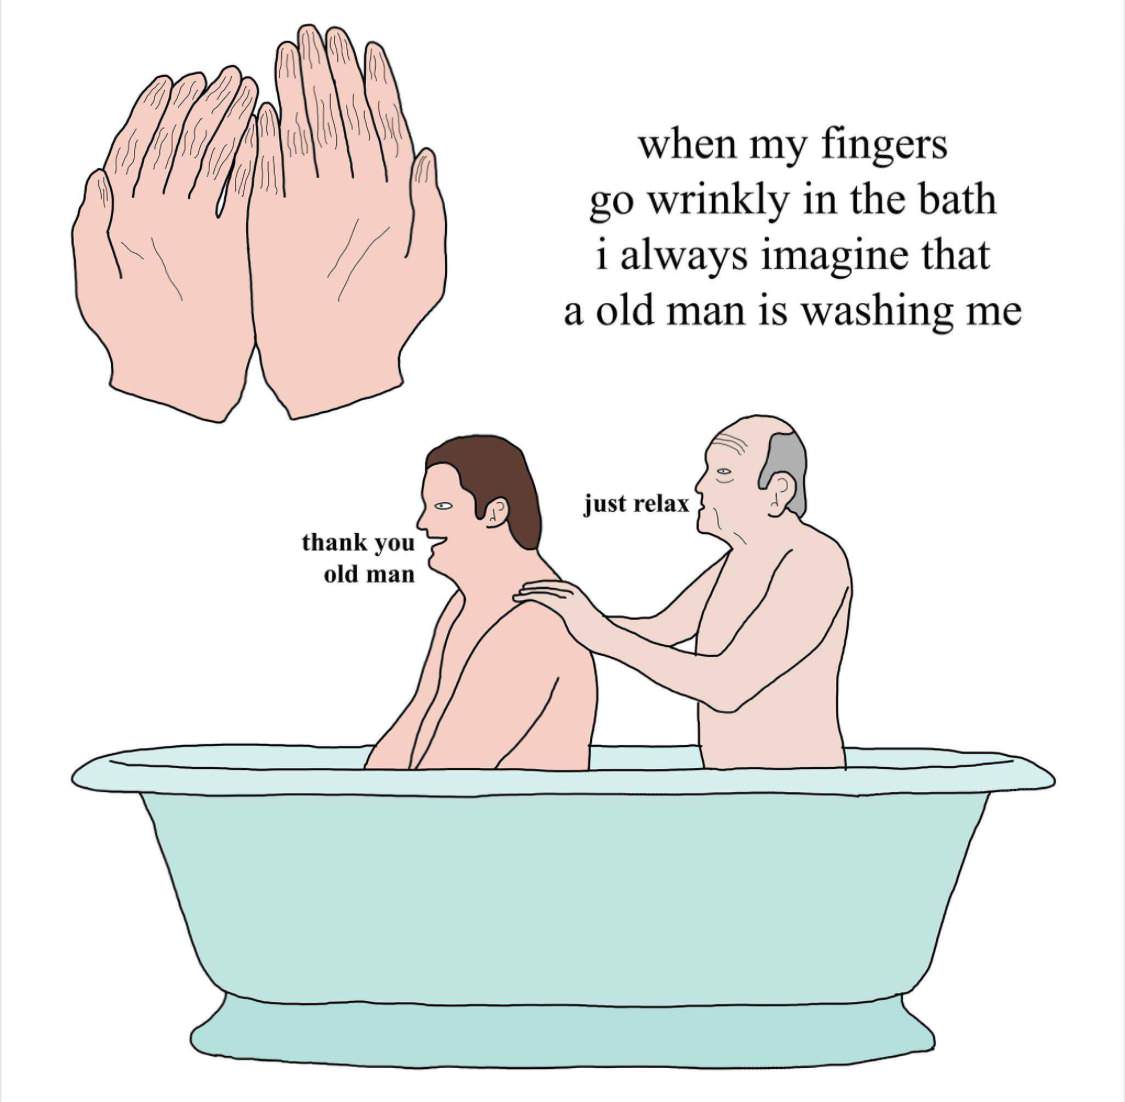 my fingers go wrinkly in the bath - when my fingers go wrinkly in the bath ...